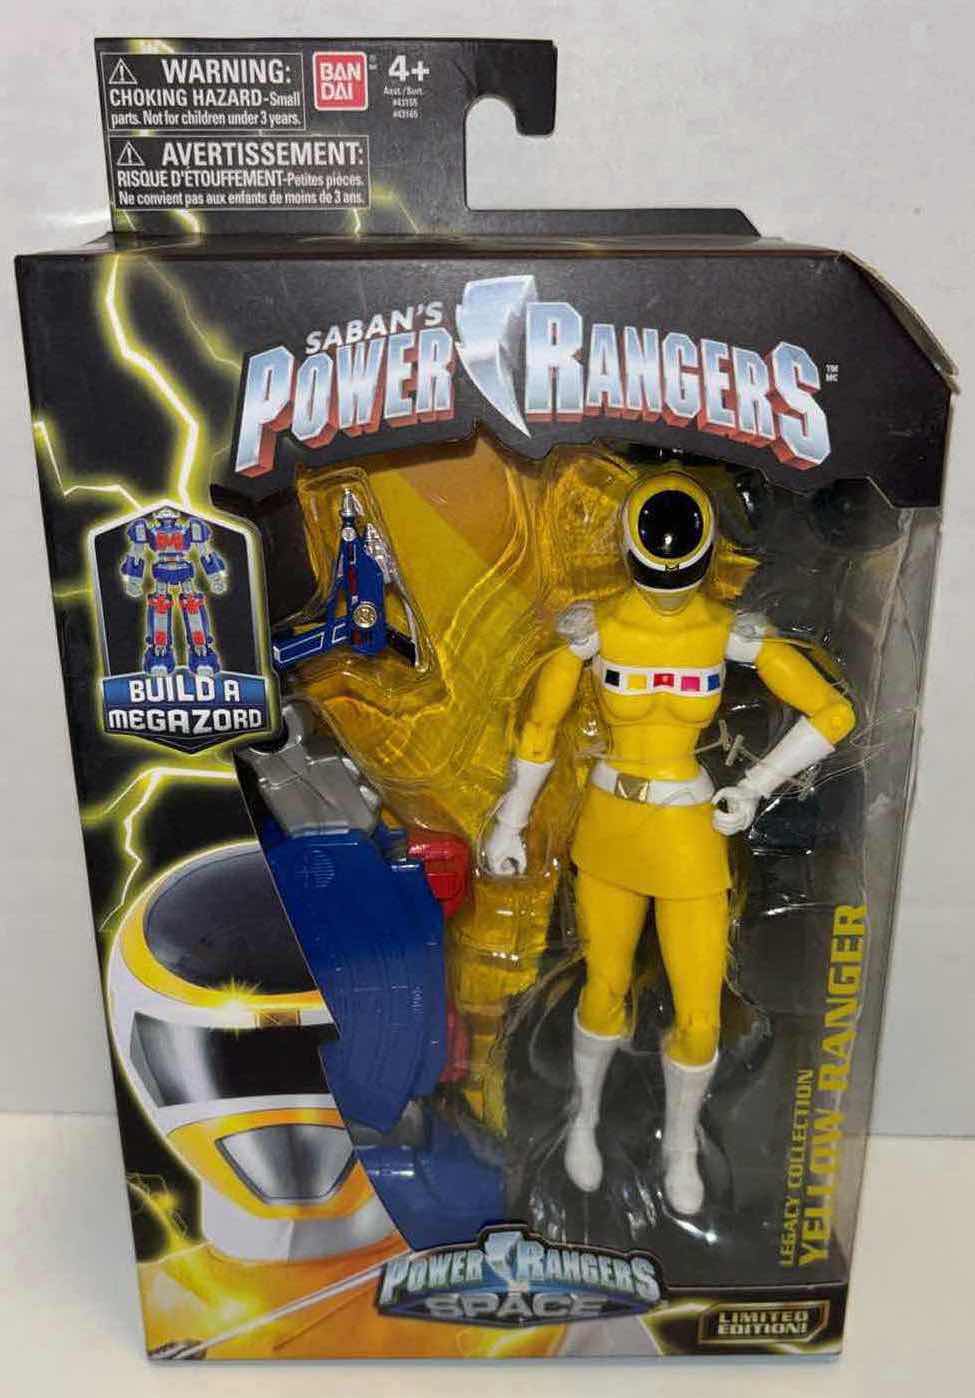 Photo 4 of NEW BANDAI SABAN’S POWER RANGERS ACTION FIGURES & ACCESSORIES 5-PACK, POWER RANGERS IN SPACE LIMITED EDITION LEGACY COLLECTION “RED RANGER, BLACK RANGER, YELLOW RANGER, BLUE RANGER & PINK RANGER”